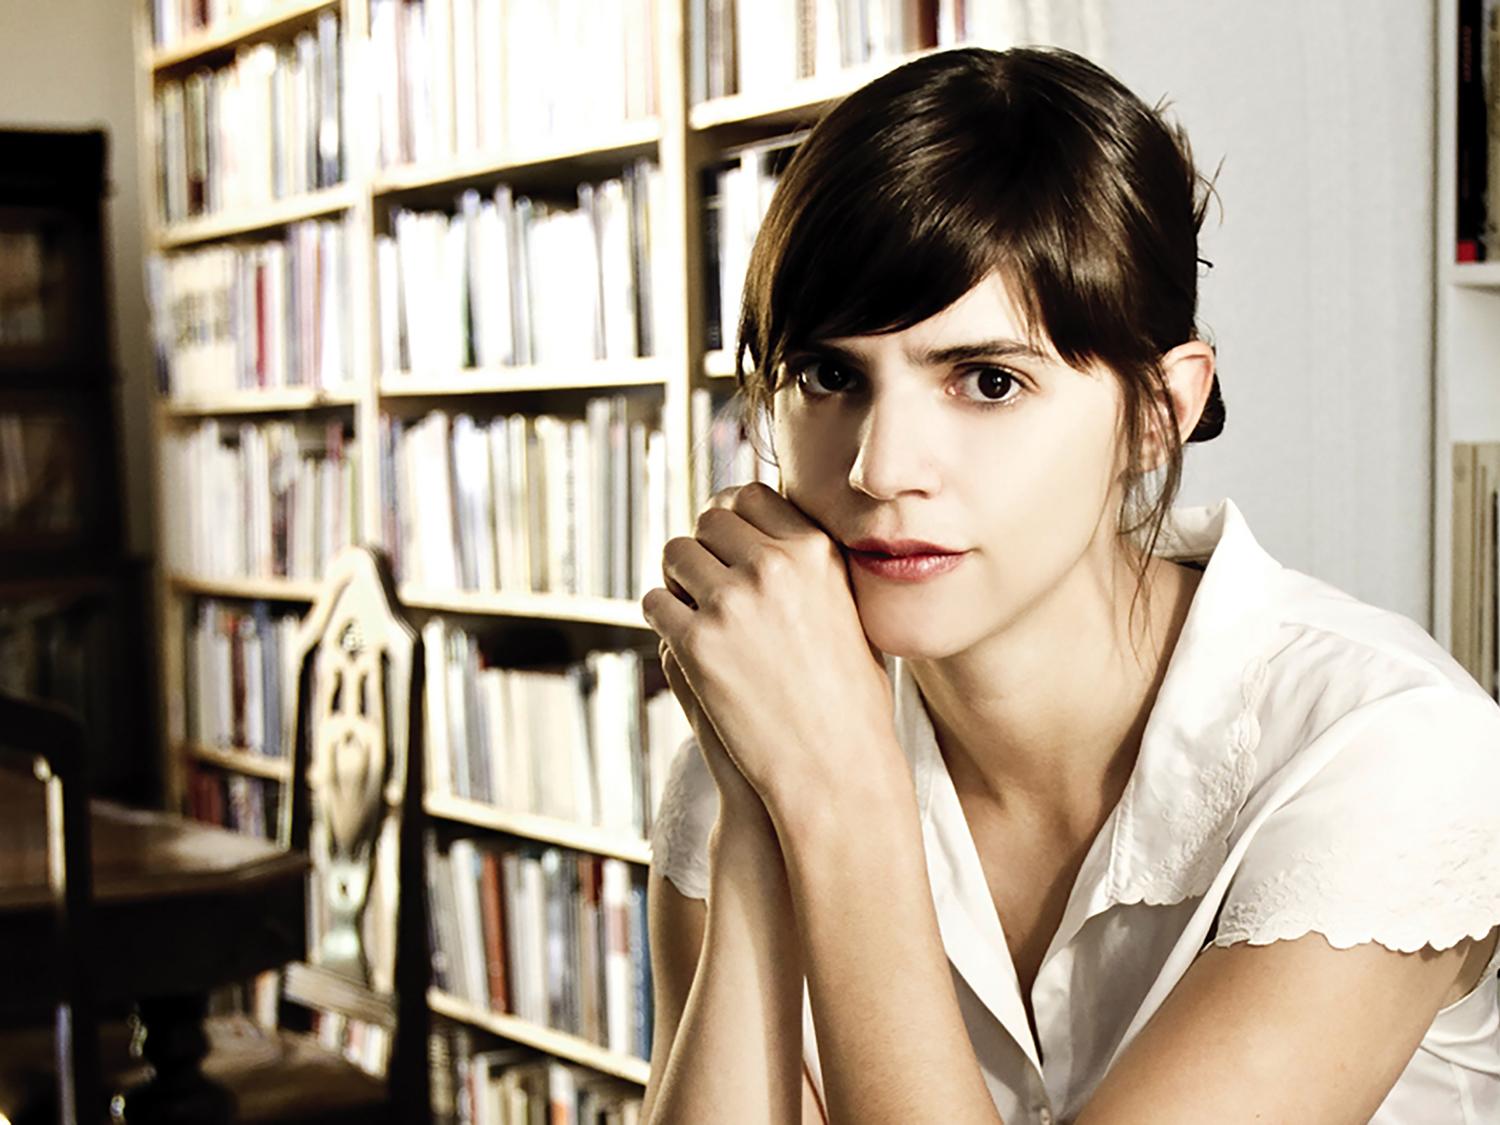 Bard College Appoints Award-Winning Author Valeria Luiselli as Writer in Residence